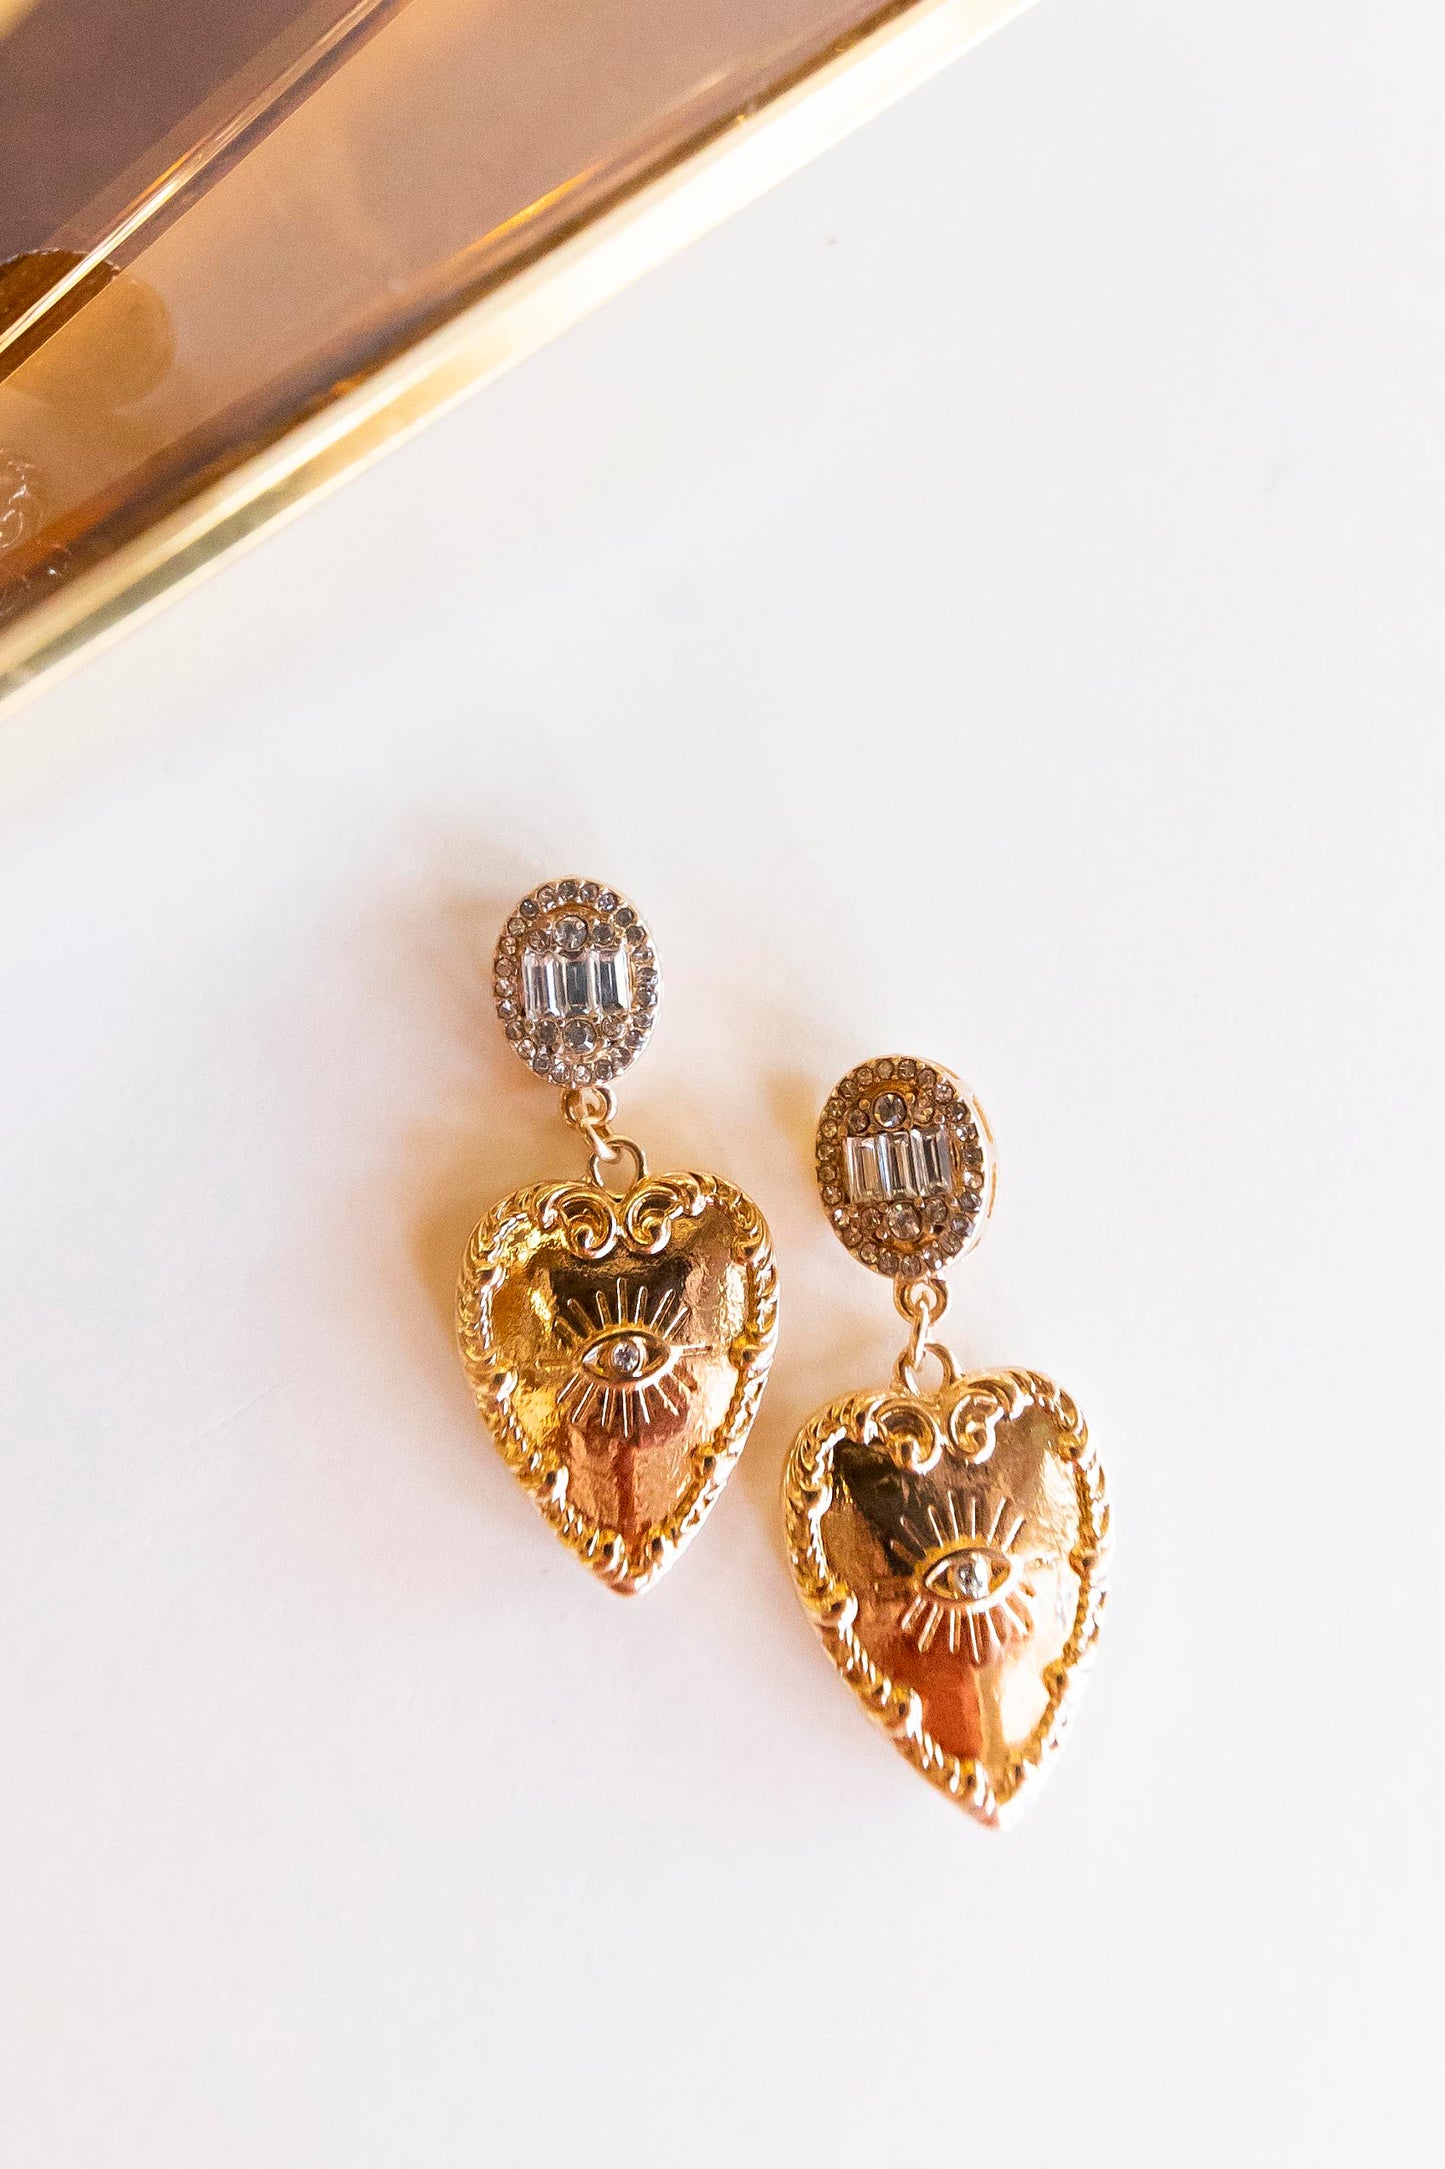 Dolce & Gabbana Gold With Pearls Heart Shaped Earrings 